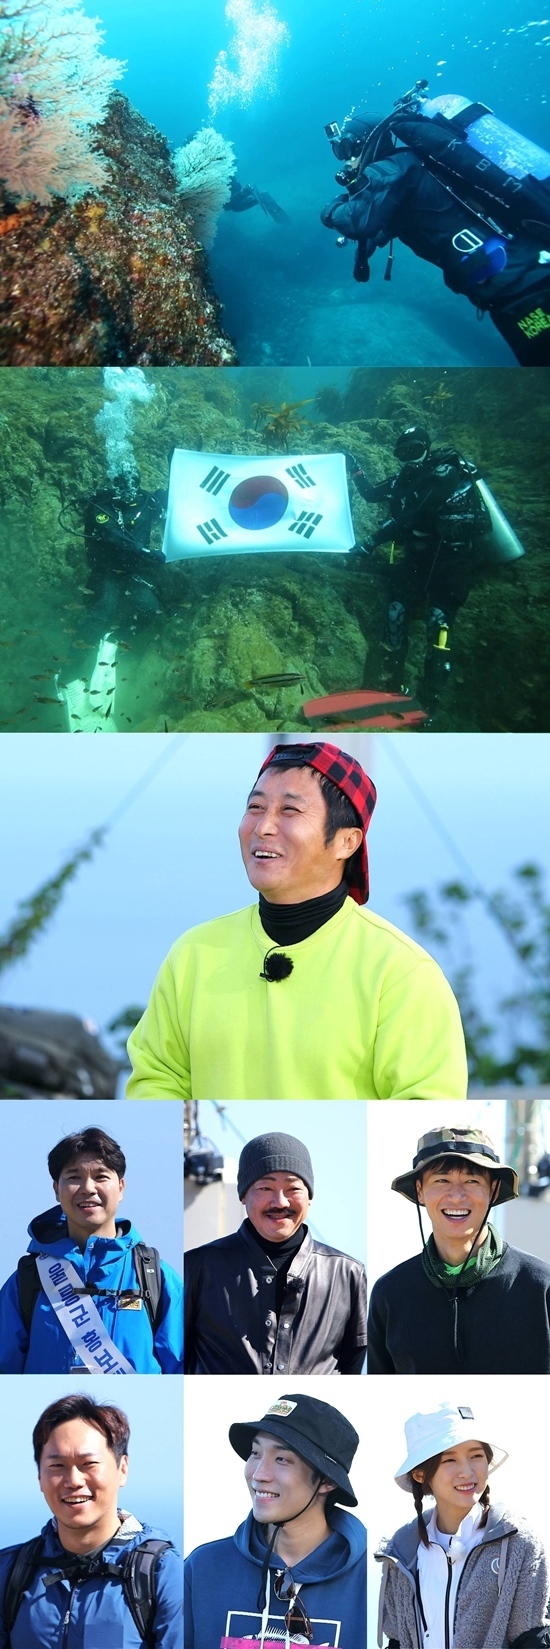 Lee Sang Yi - OH MY GIRL Arin Ulleungdo Liancourt Rocks Swoop, How about the first Jungle Top Model?Earth 2 of illness satisfaction unfolds on the island of Ulleungdo in SinB is revealed.SBS Jungles Law The fifth season of domestic convenience Ulleungdo.liancourt Rocks will be broadcast on December 12th.The top model stage for this illness is Ulleungdo, called the Galapagos in Korea. Ulleungdo is a tough place to live because of the rough weather.SinBs island, which keeps its own ecosystem with its ancient nature as it is hard to reach, begins its exploration Earth 2, which is based on self-sufficiency.Actor Lee Sang Yi and OH MY GIRL Arin will be the top model in the first Jungle of their lives, led by Kim Byung-man, the chief of the expedition.Lee Sang Yi, who was greatly loved as a national son-in-law through the drama this year, showed a 100% adaptability with a versatile talent, and Arin of the popular girl group OH MY GIRL, which caused a splash in the music industry, laughed and tears in Jungle (?) will play a reverse role.Also, Ulleungdo Public Relations Ambassador Park Soo-hong, the world-recognized Korean food chef Lee Jong-guk, Pro Jungler Oh Jong-hyuk and Tension Manleb Song Jin-woo, who claimed to be Jungle Musque, will join the first Ulleung Exploration Team.